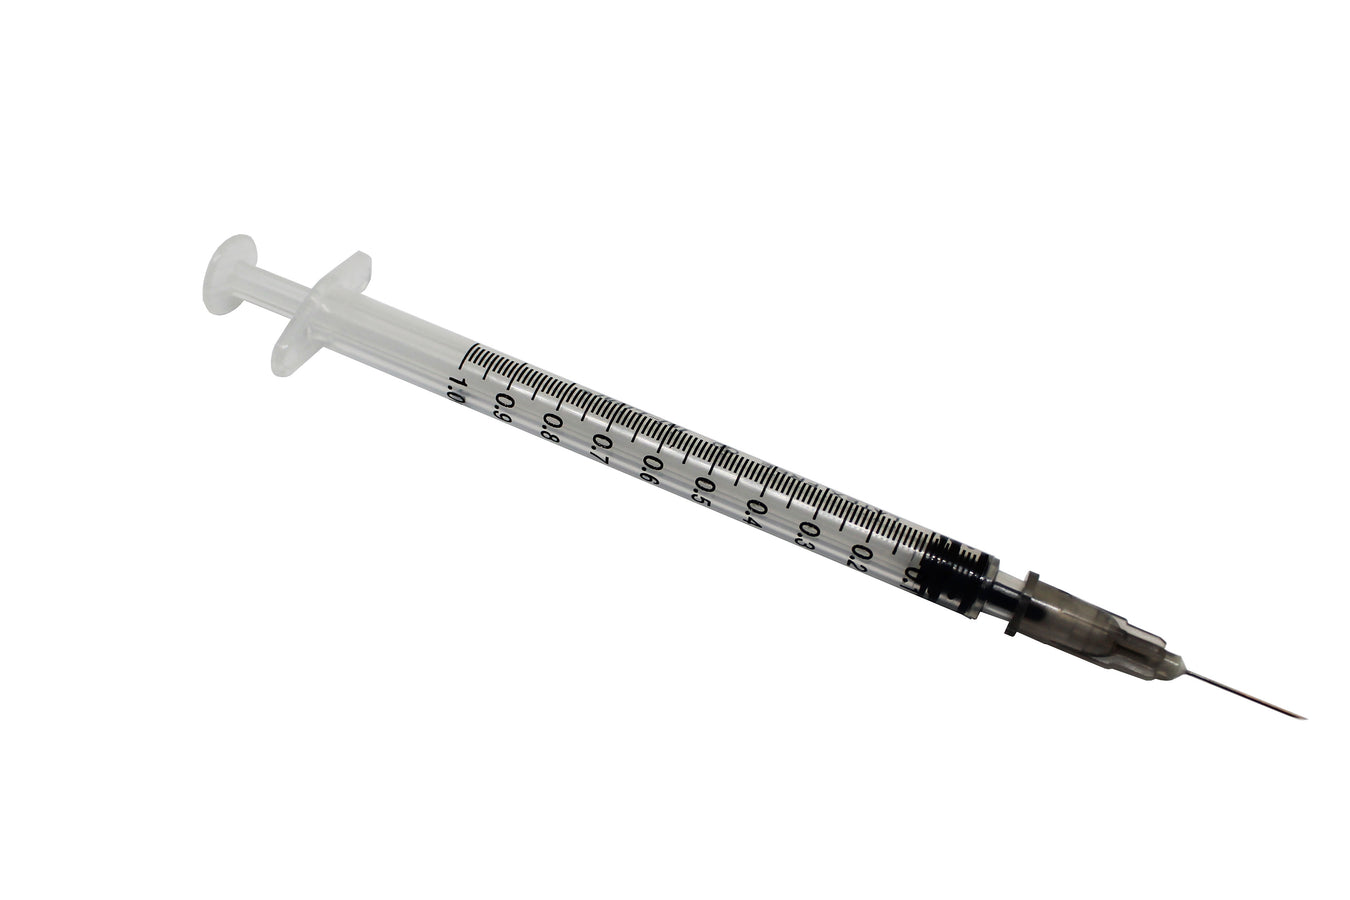 1ml syringe with hypodermic needles for sale at amazing prices! sterile latex free ce marked.